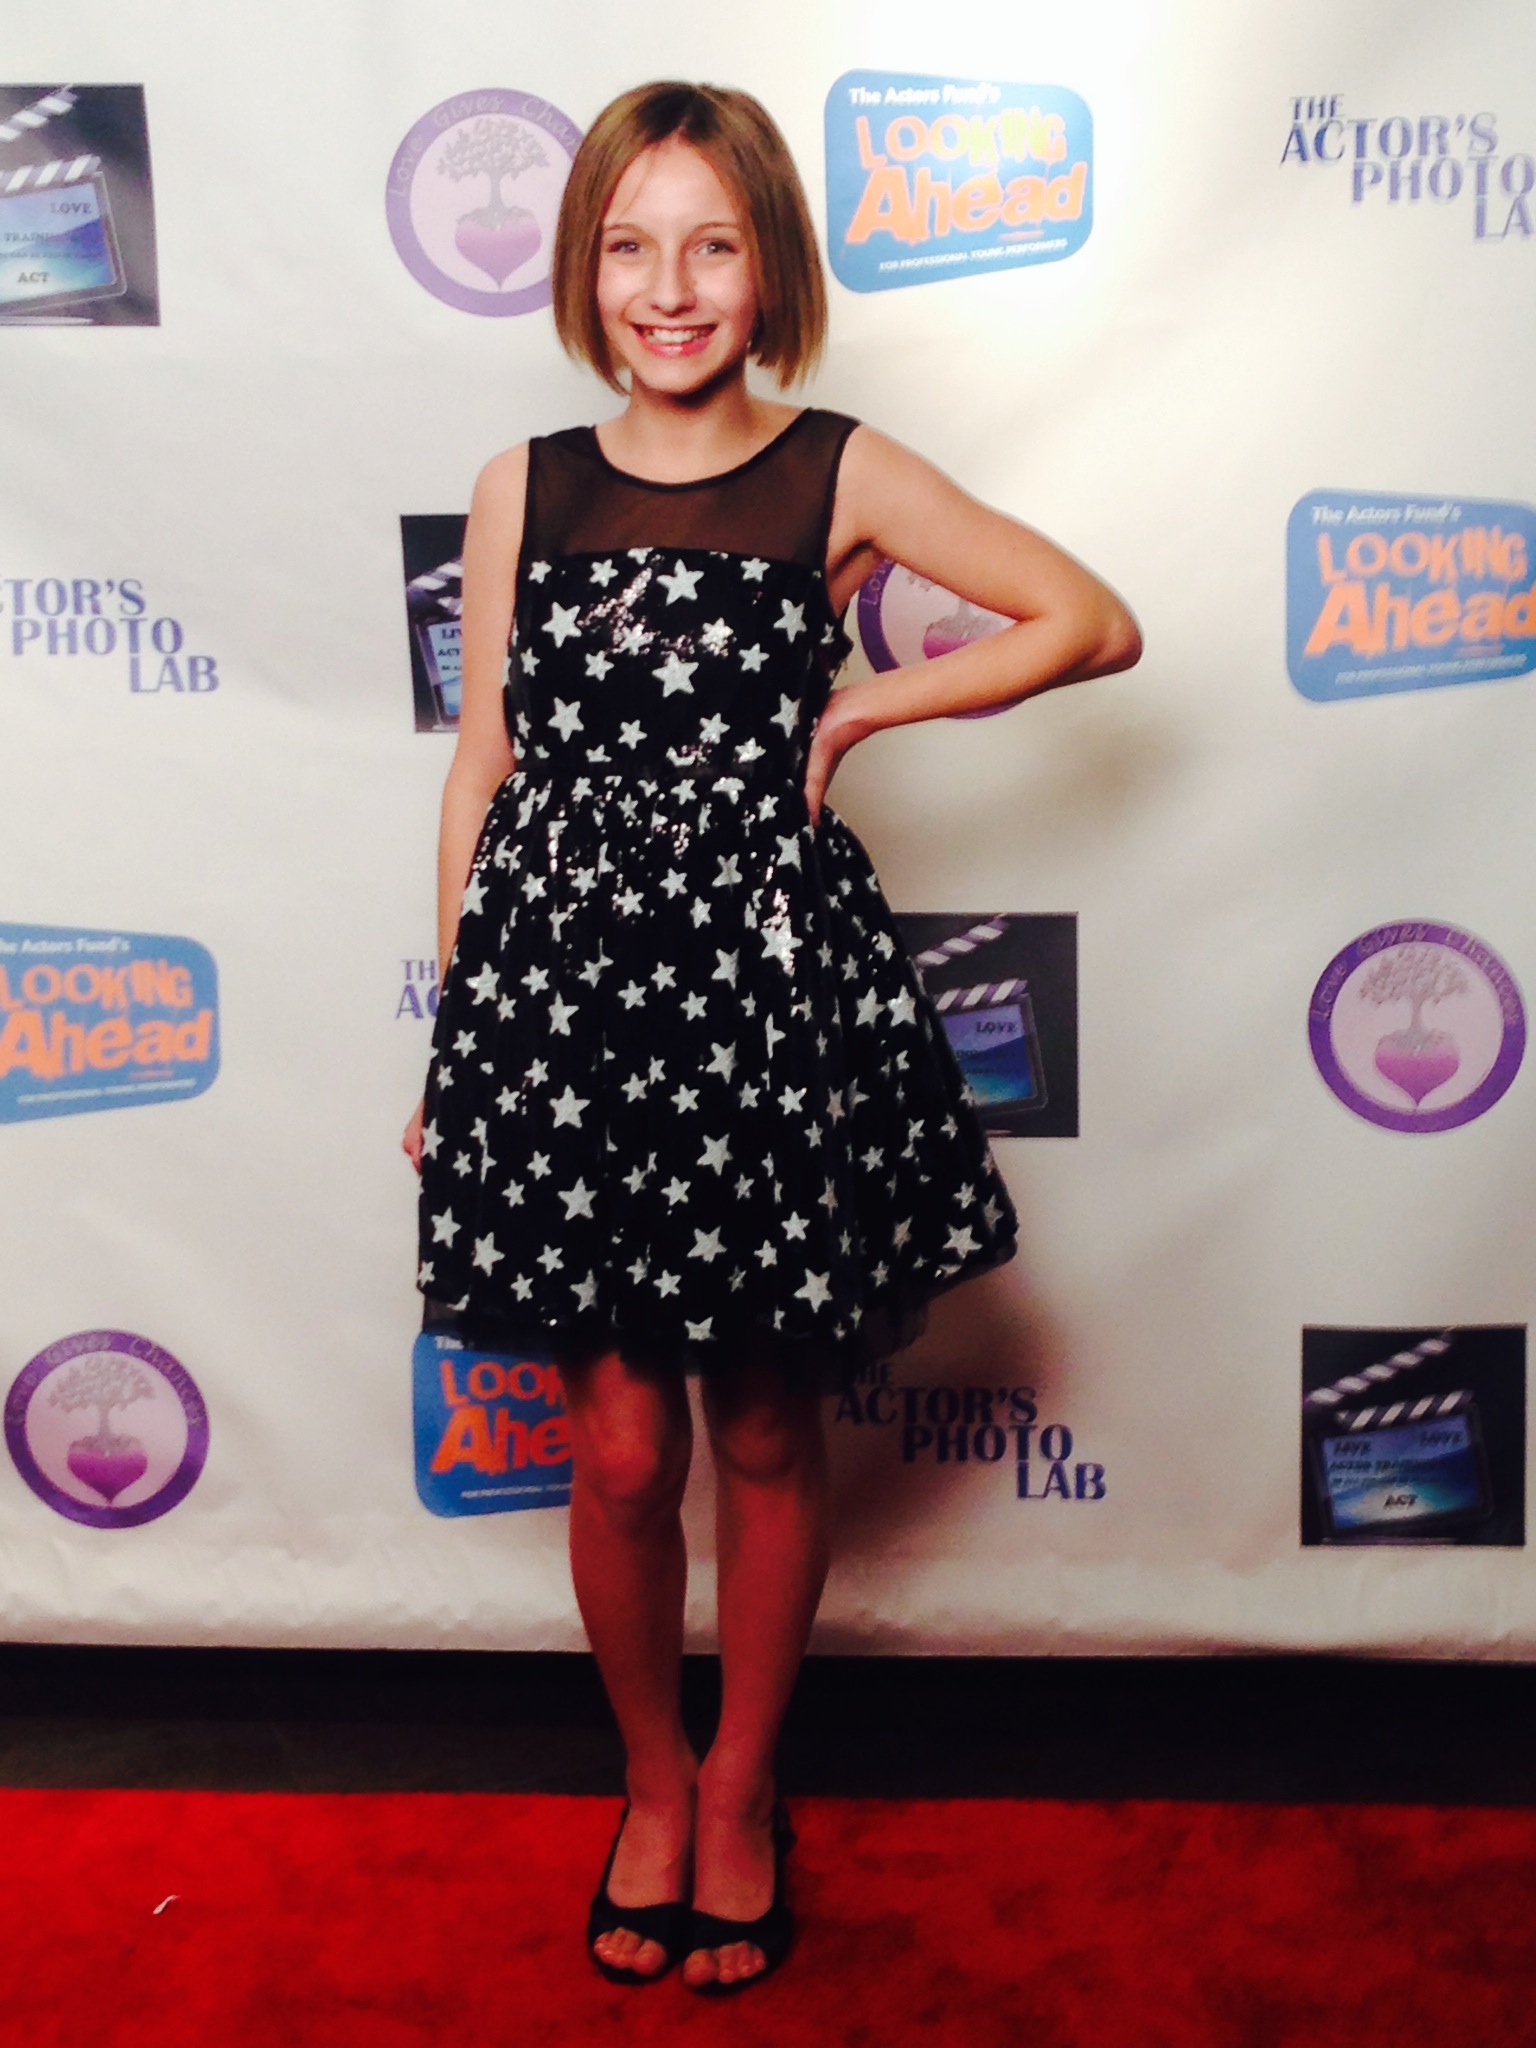 Riley at the ATLA Red Carpet Event Feb 2, 2014 at the Infusion Lounge Universal City